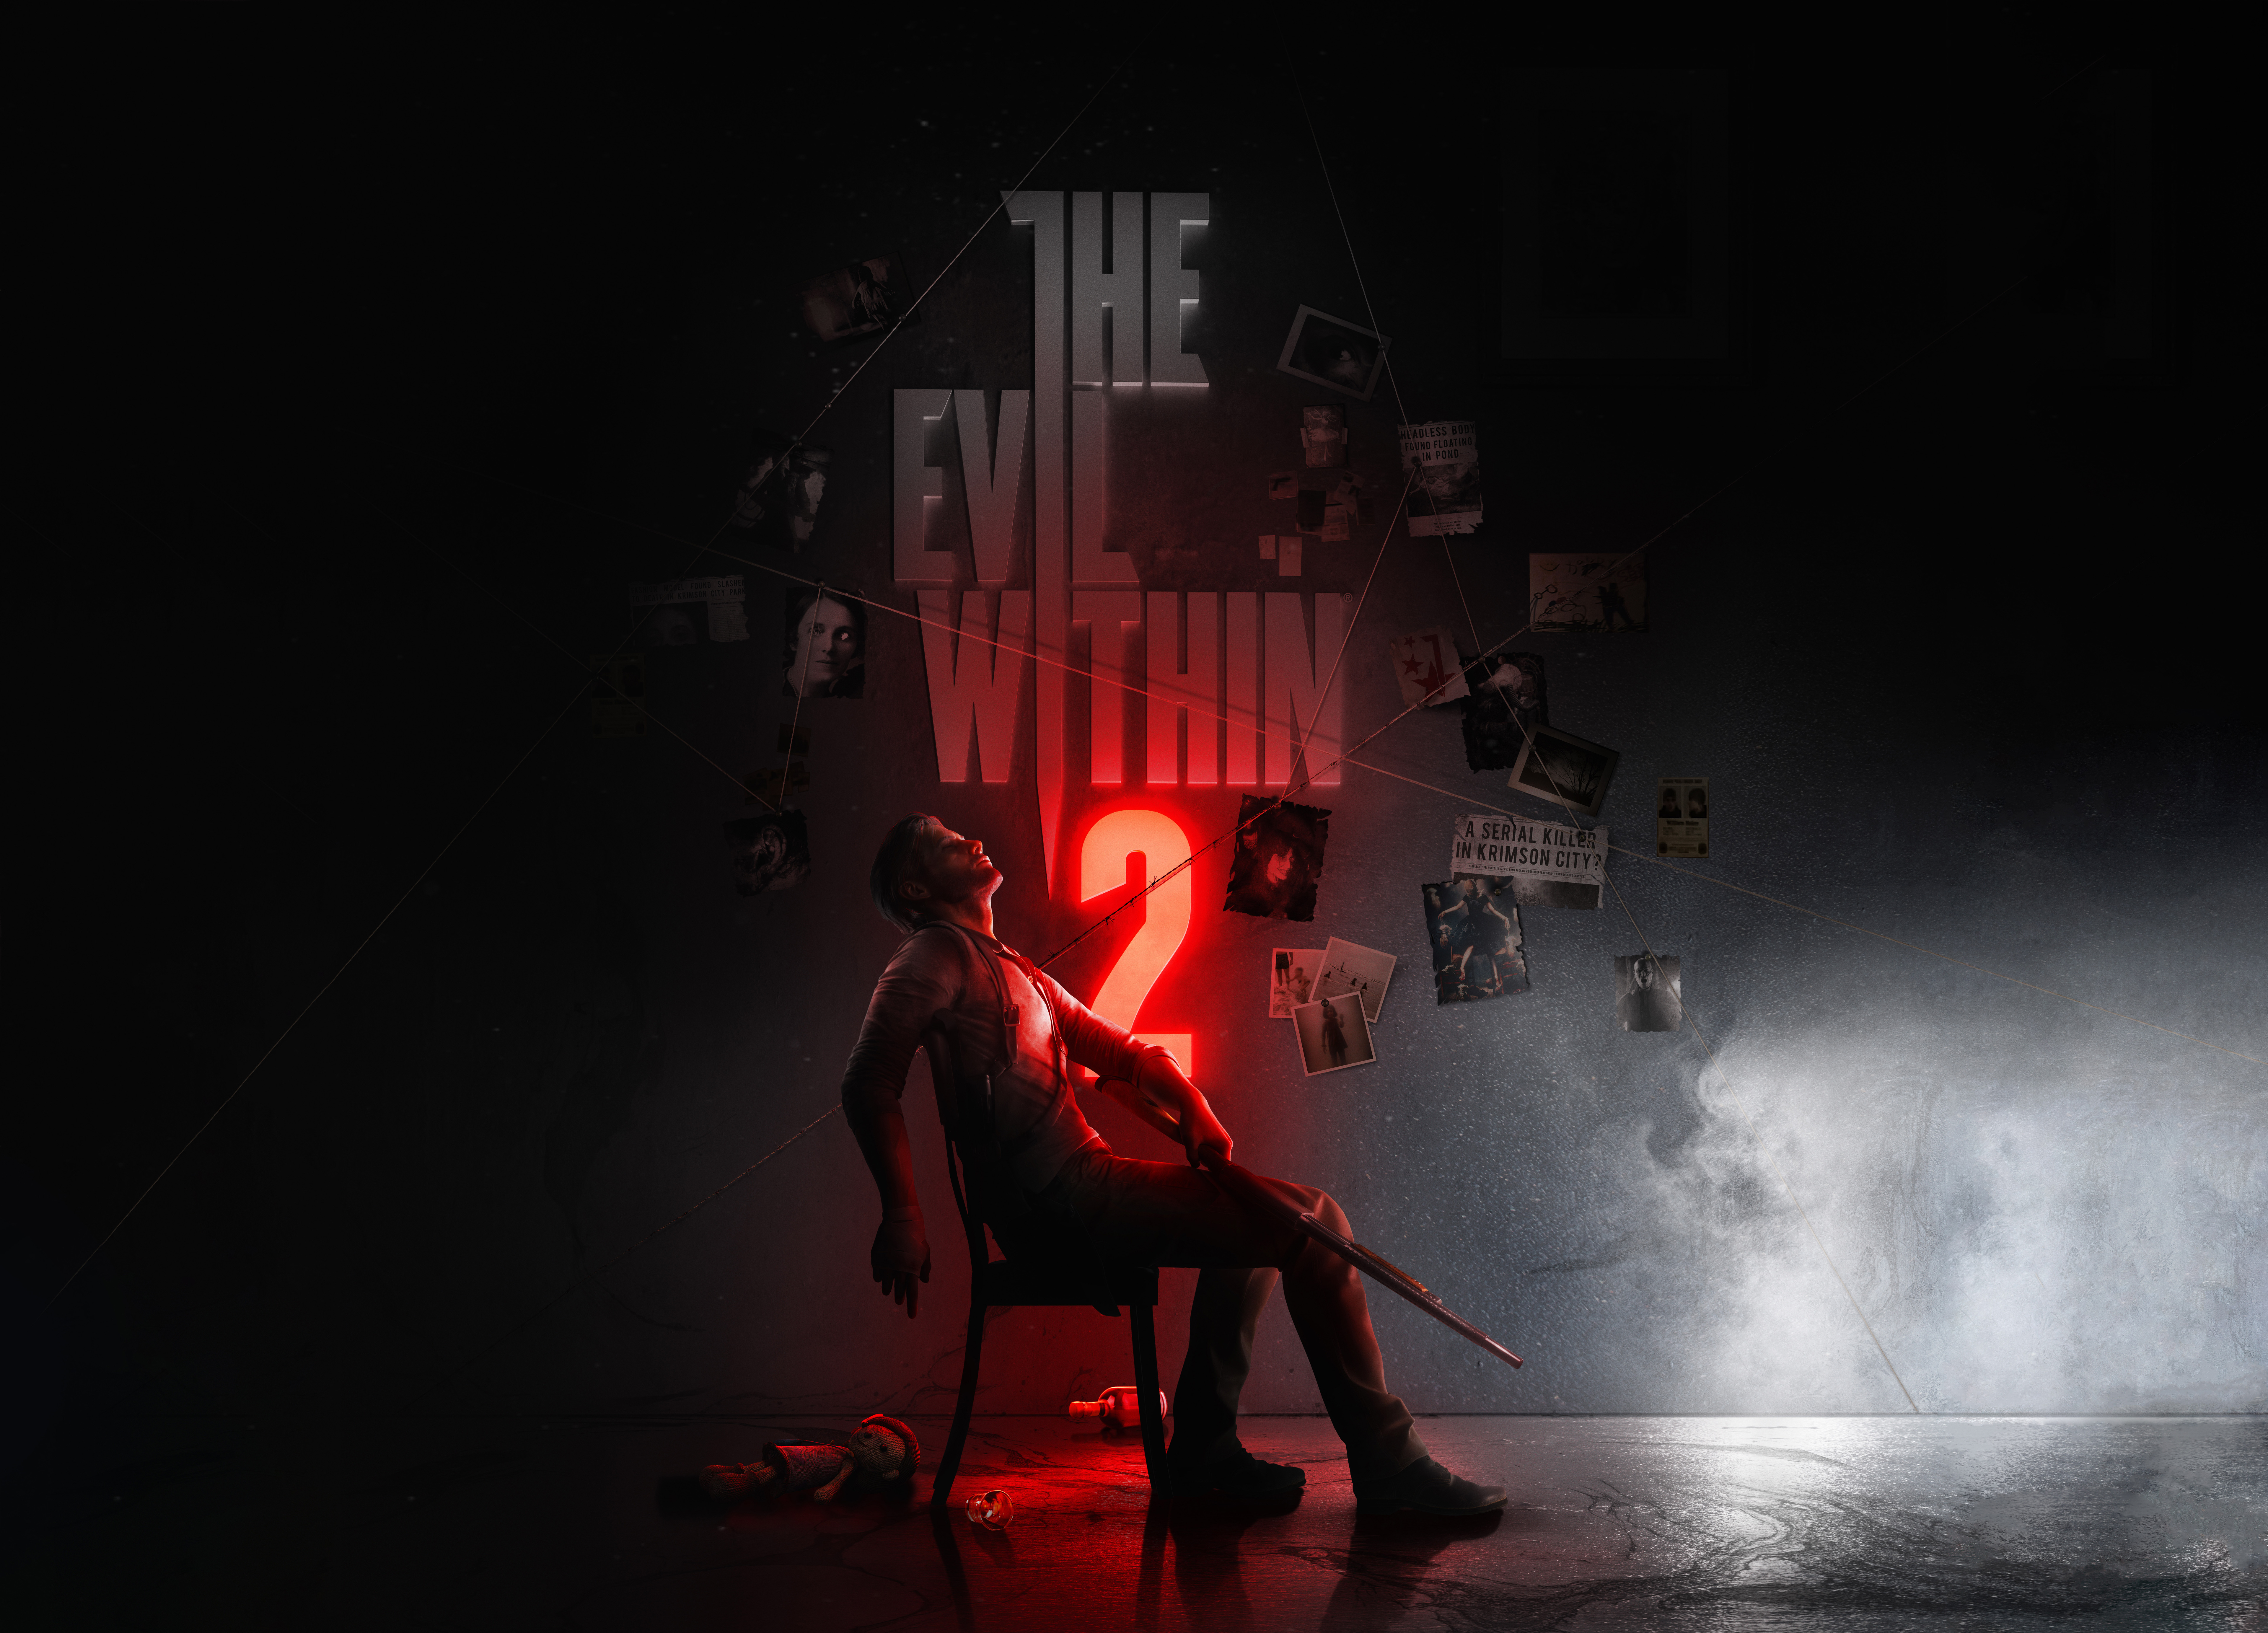 download the evil within 2 ps4 for free